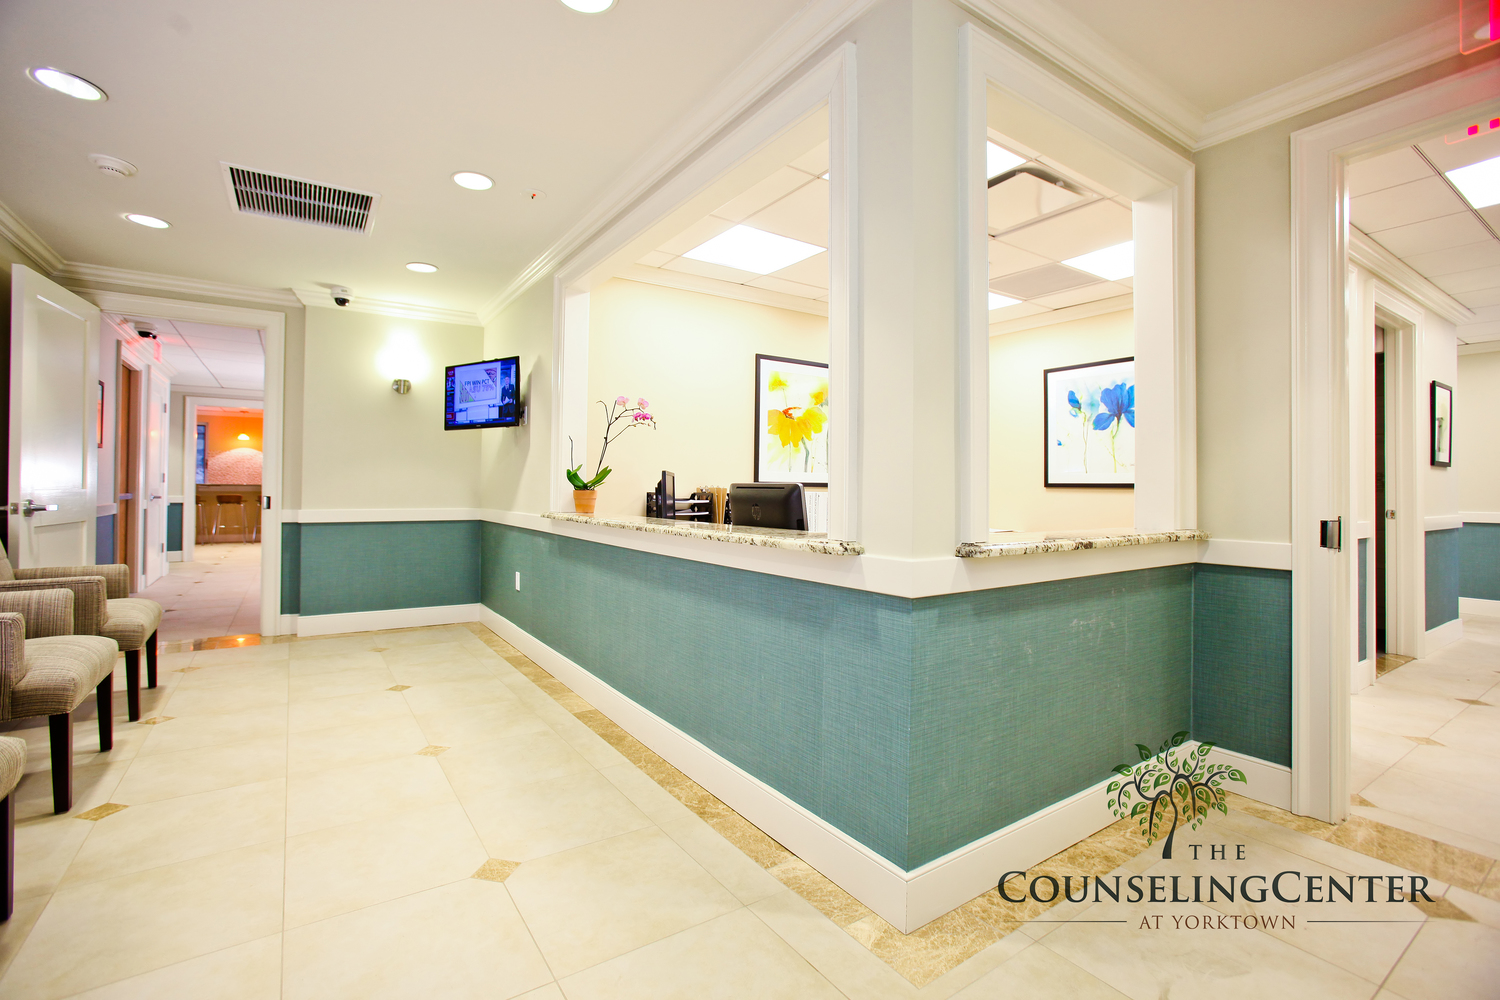 Gallery Photo of The Counseling Center is a safe and clean environment.